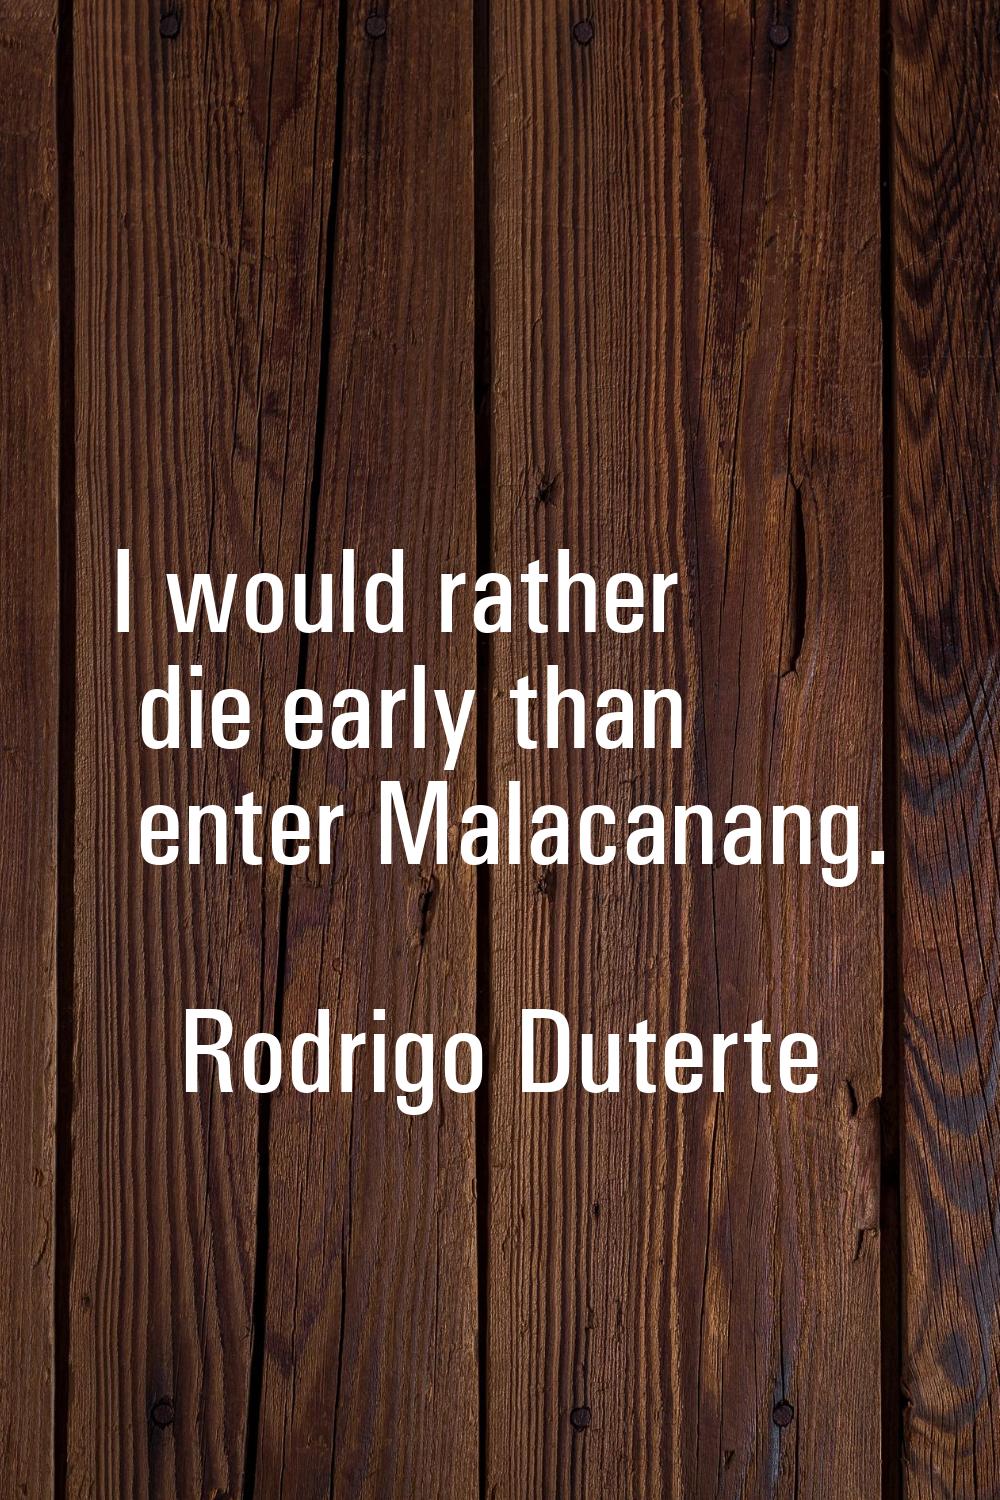 I would rather die early than enter Malacanang.